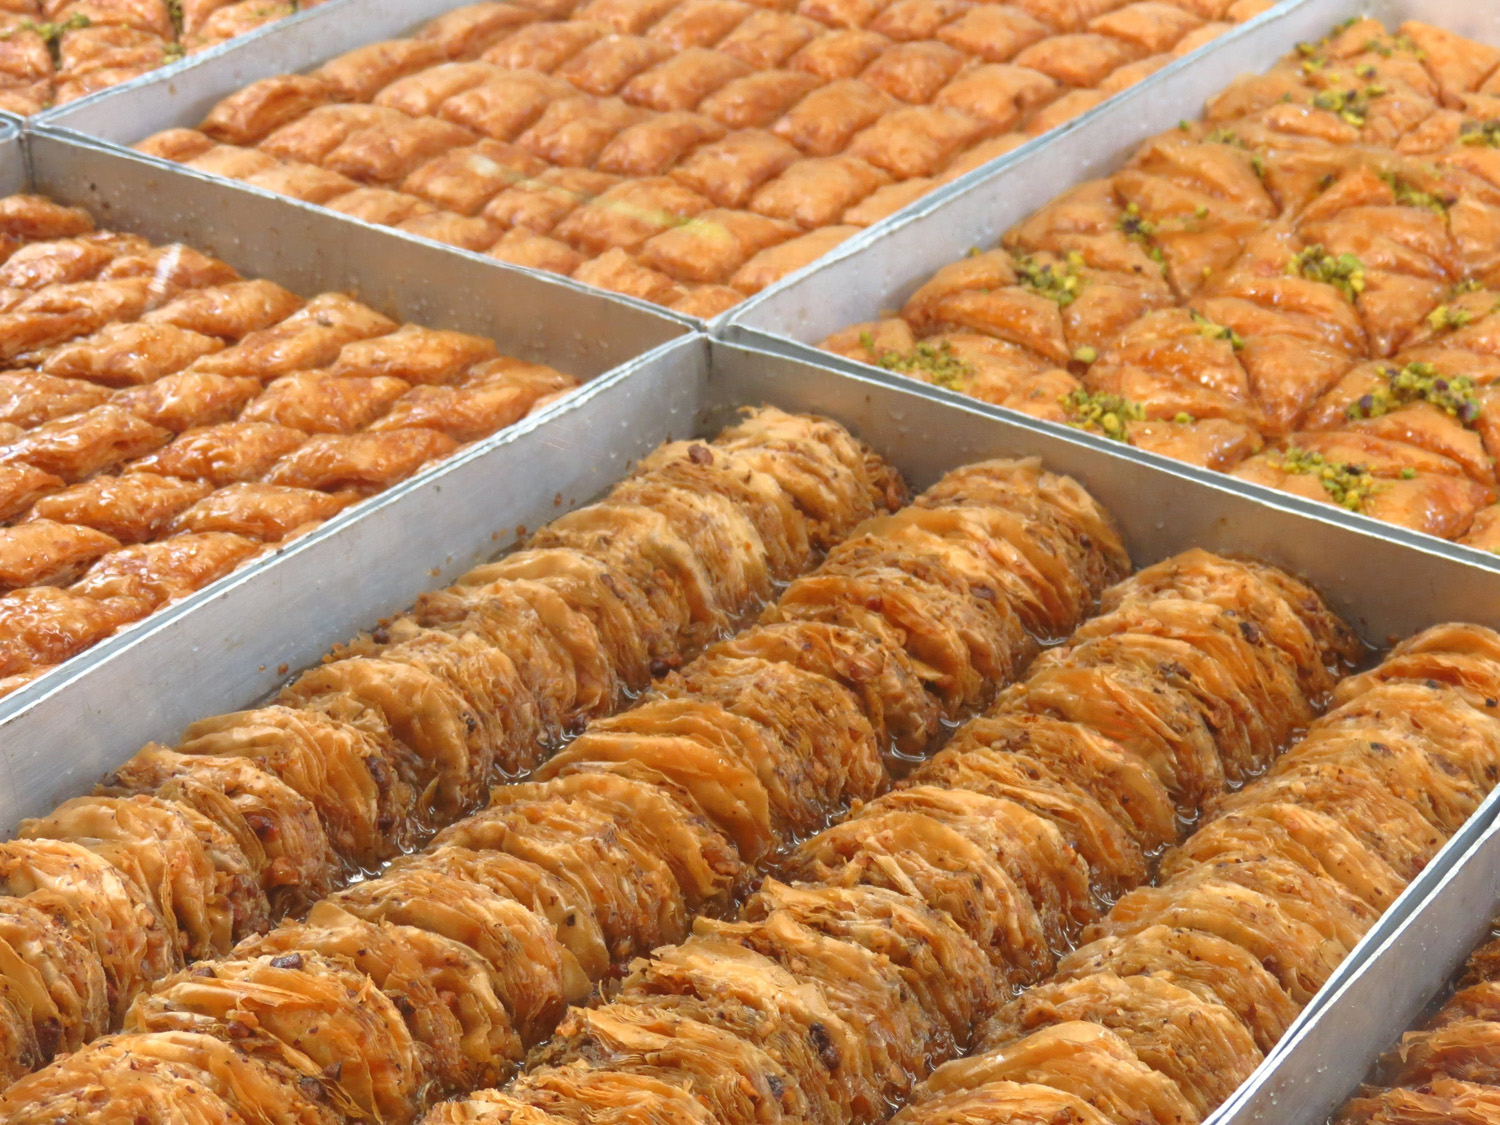 Varieties of handmade baklava on the glass display of a confectionery store in Komotini, North Greece